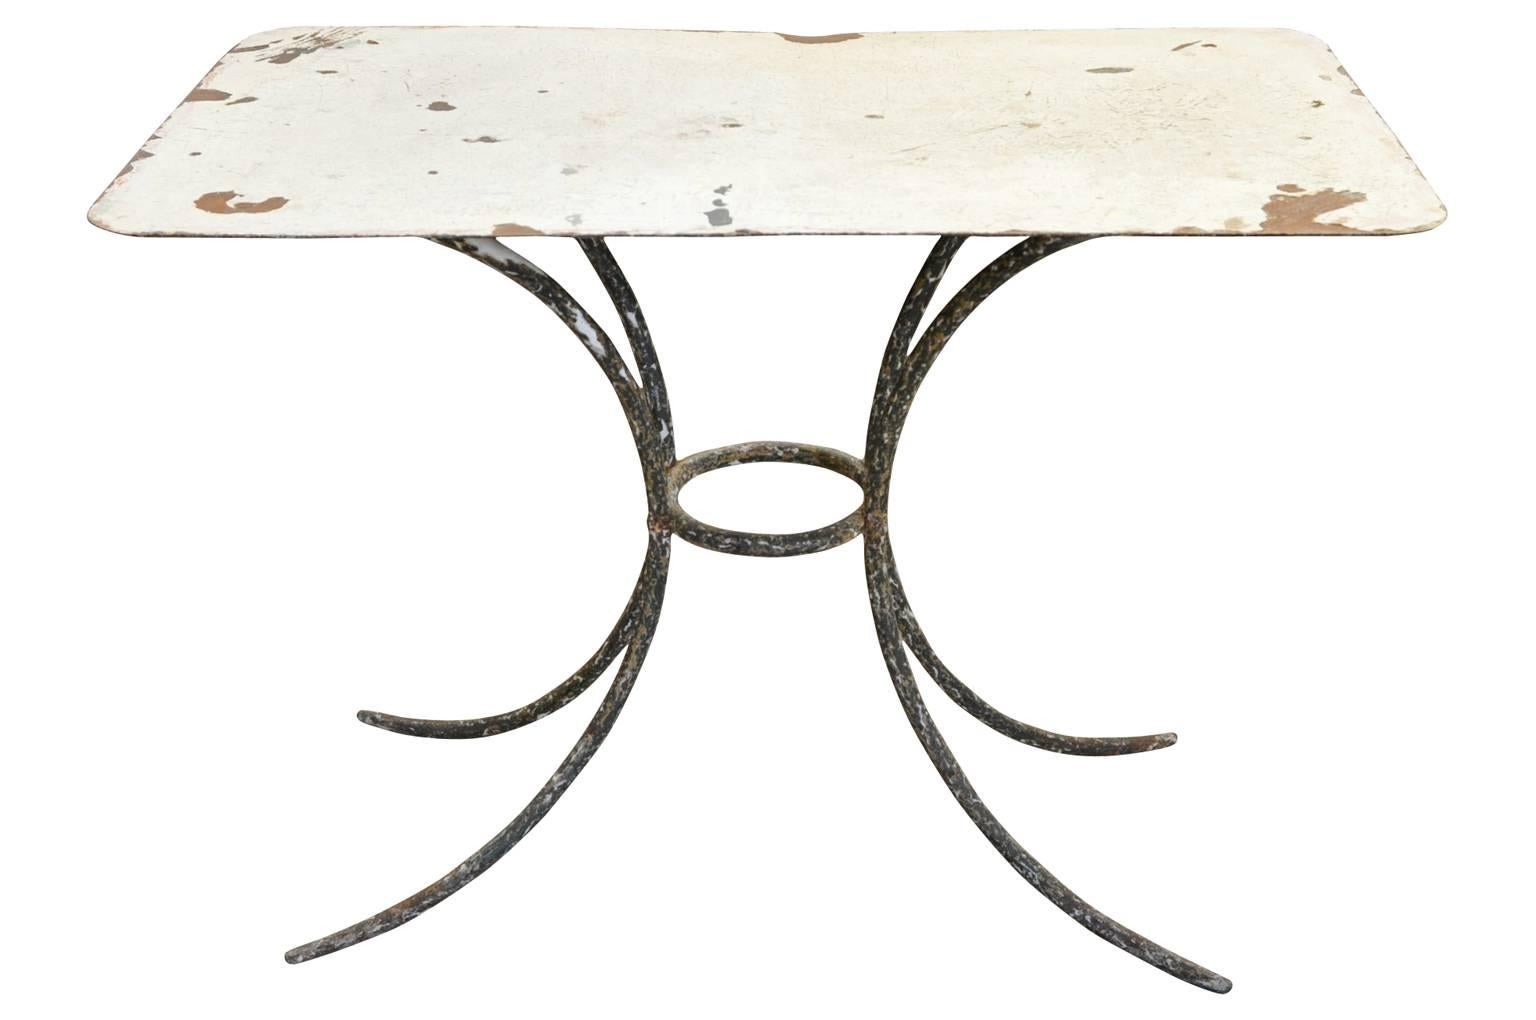 An early 20th century garden table - bistro table from the South of France in painted iron.